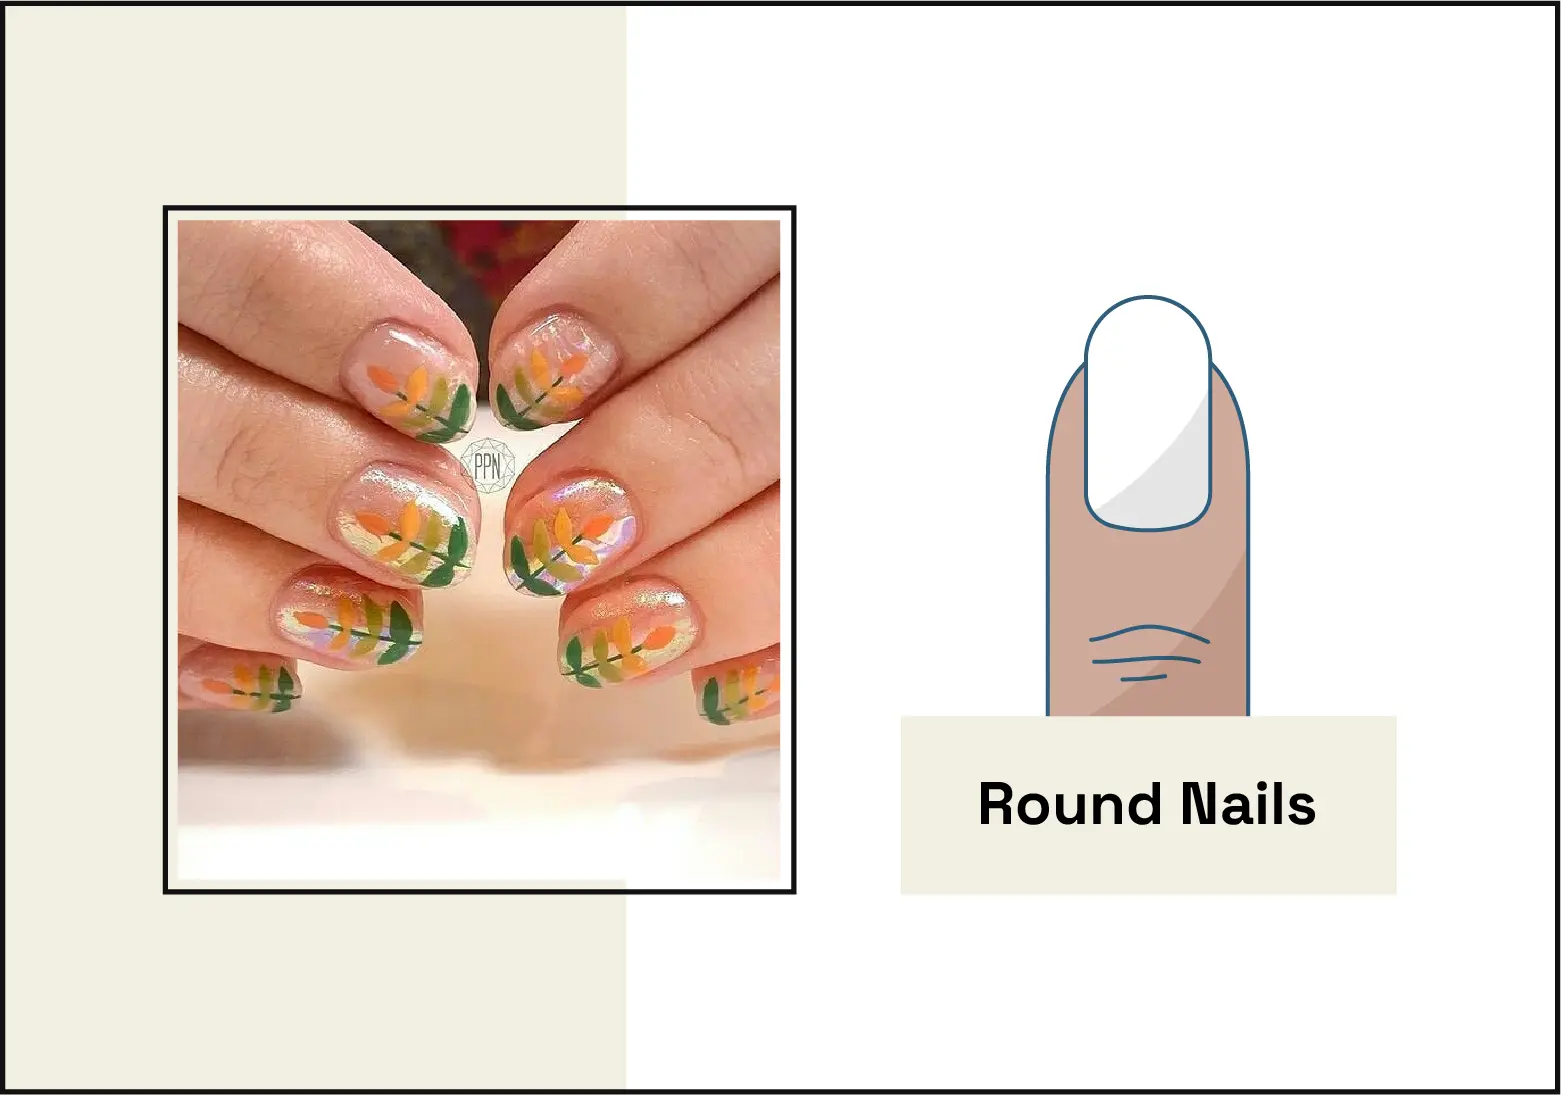 photo of manicure with round nails with colorful leaf nail art on the left, illustration of the round nail shape on the right